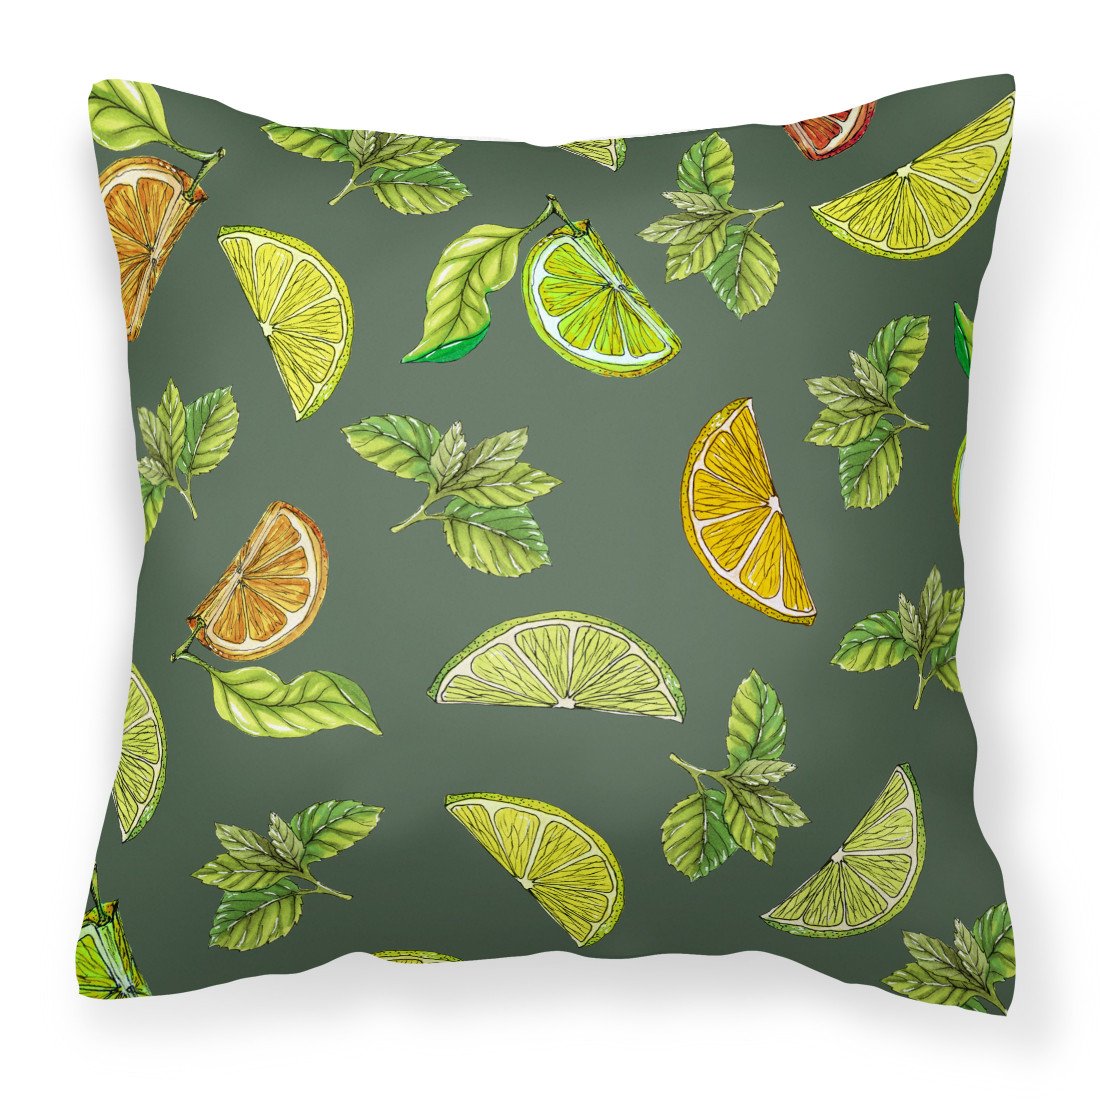 Lemons, Limes and Oranges Fabric Decorative Pillow BB5207PW1818 by Caroline's Treasures